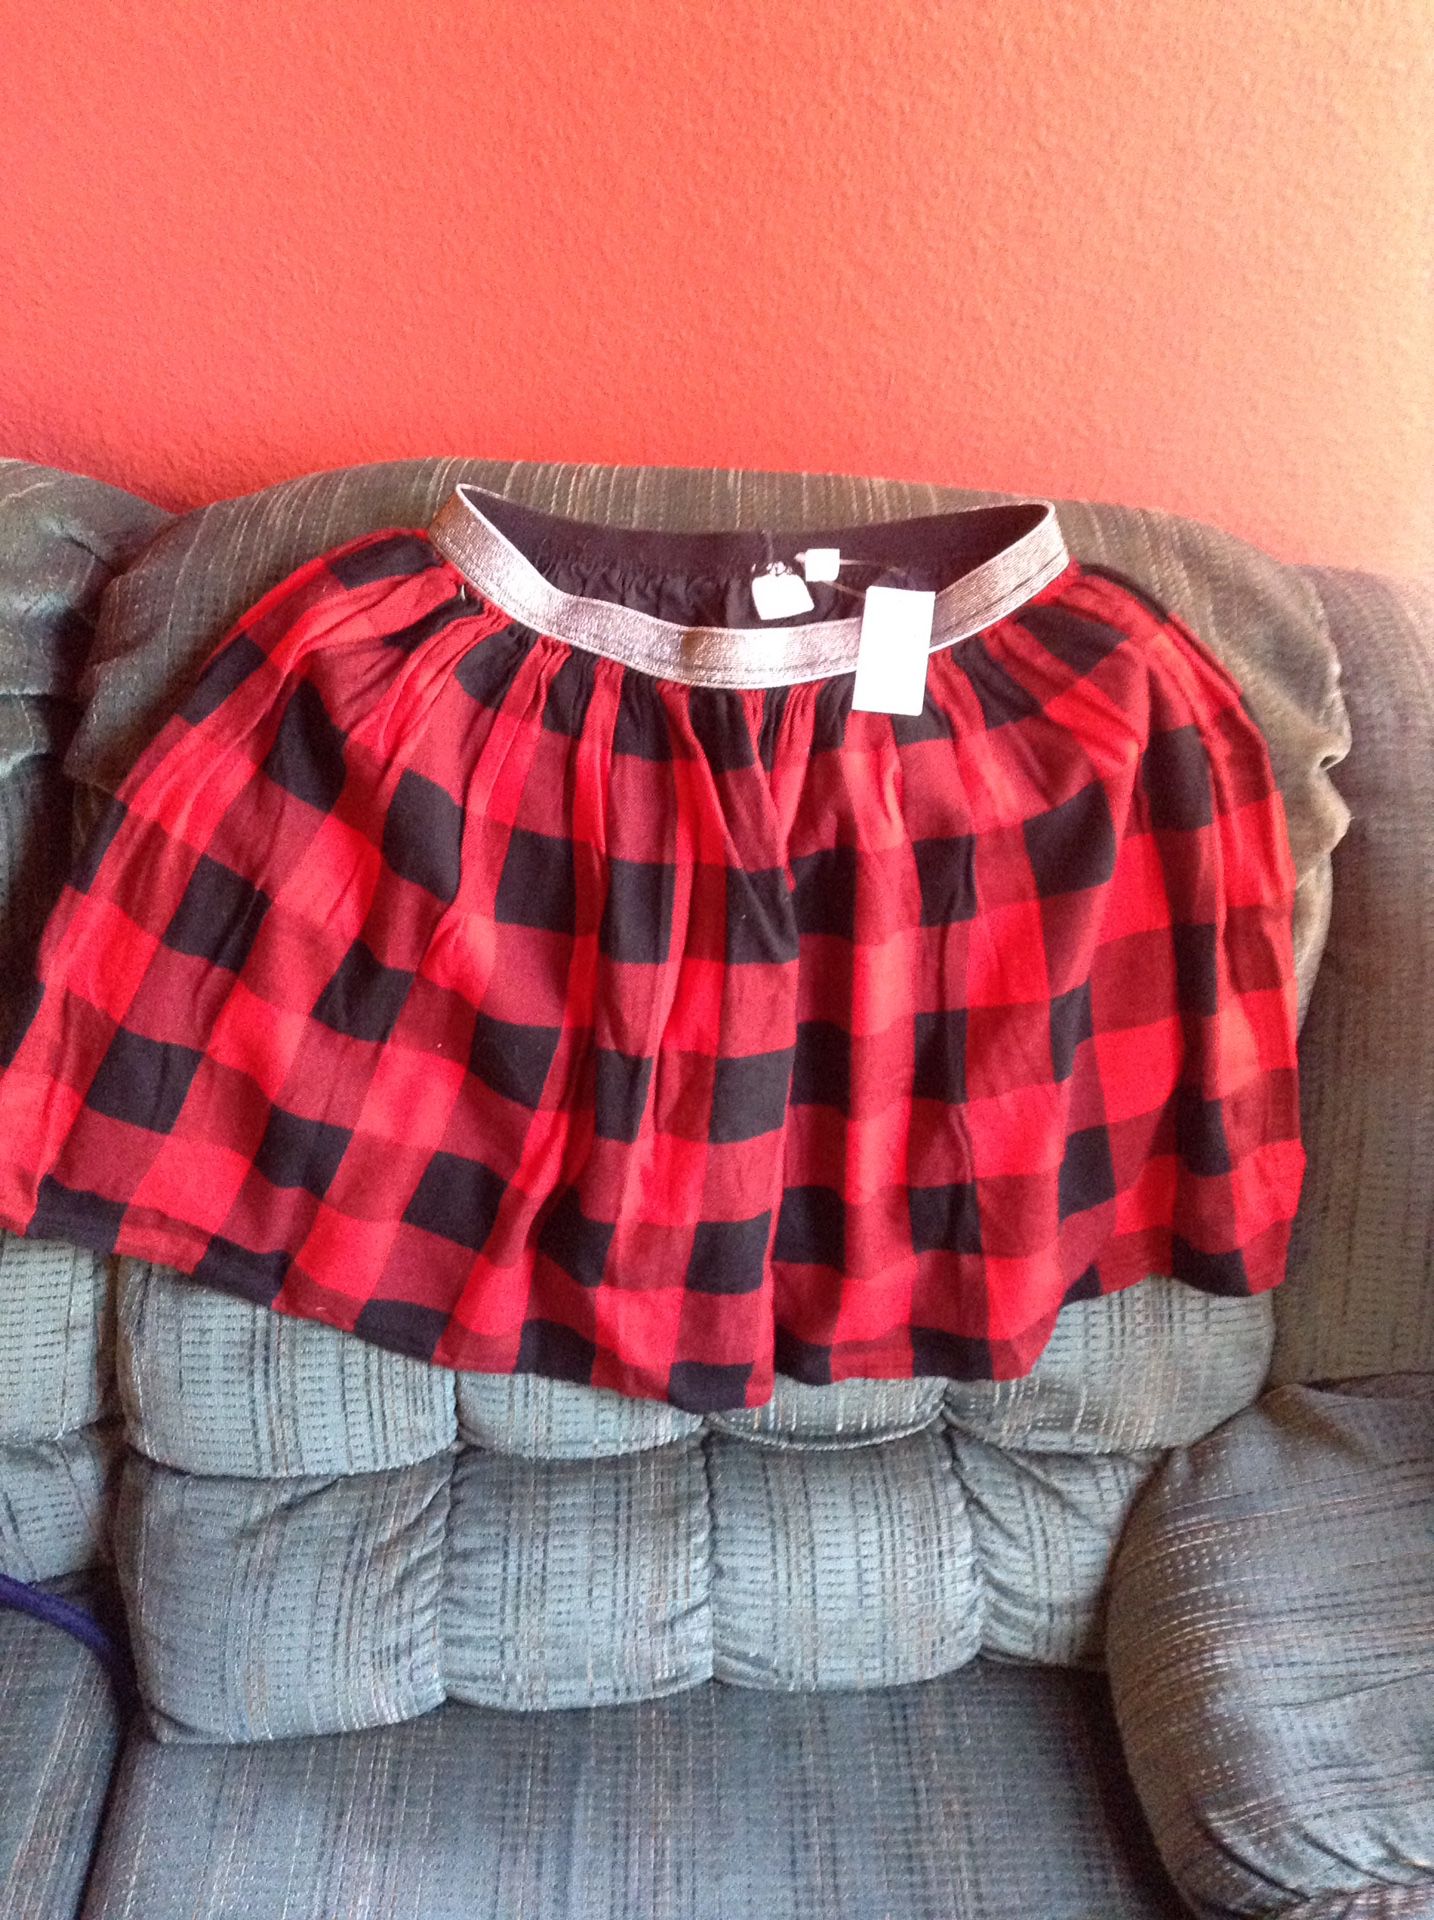 Girls plaid skirt ( juniors ) girls clothes,new with tags,gap kids.